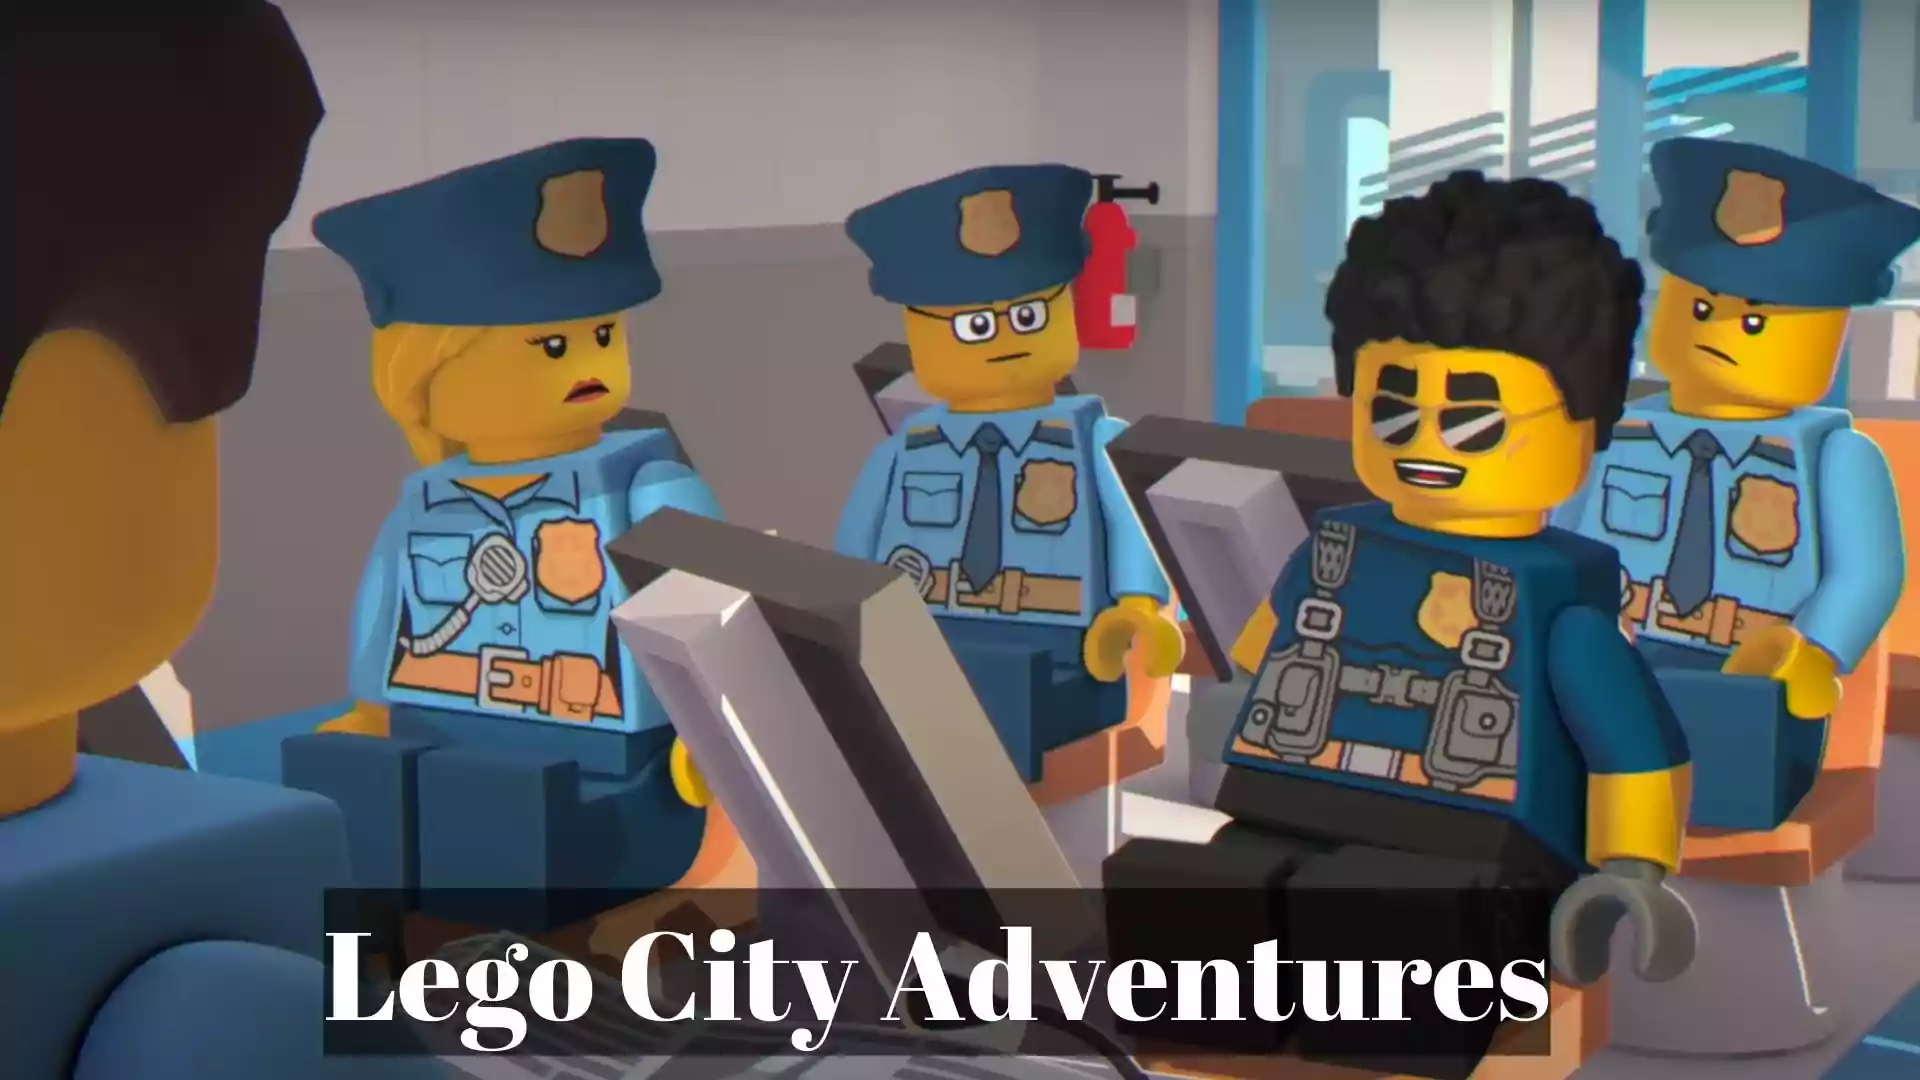 Lego City Adventures Wallpaper and Image